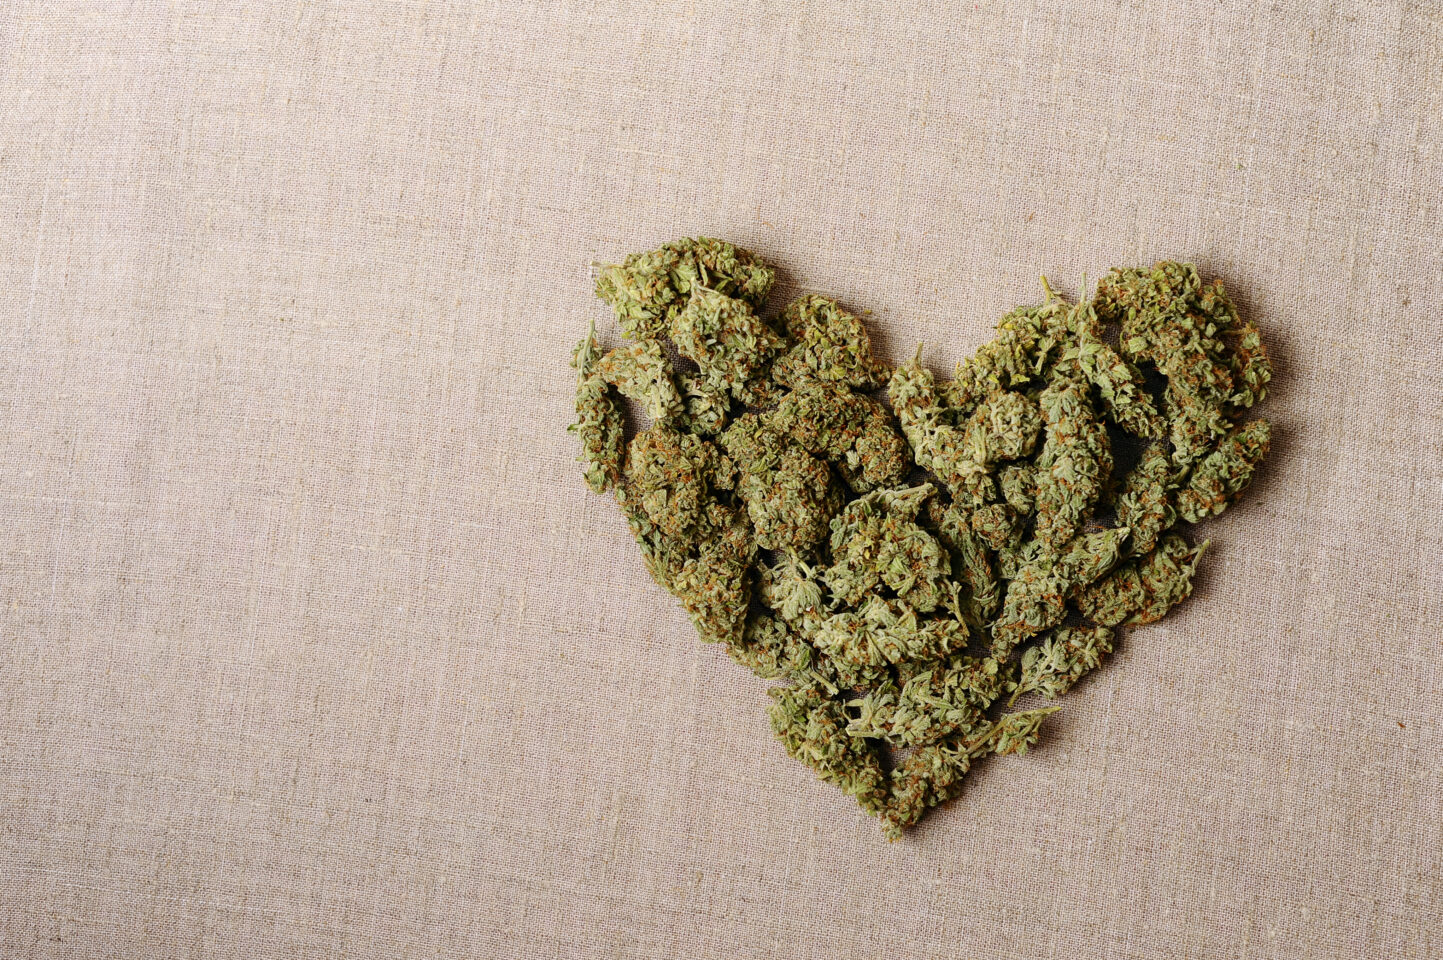 Heavy Cannabis Use Linked to Increased Risk of Heart Problems in Canadian Study